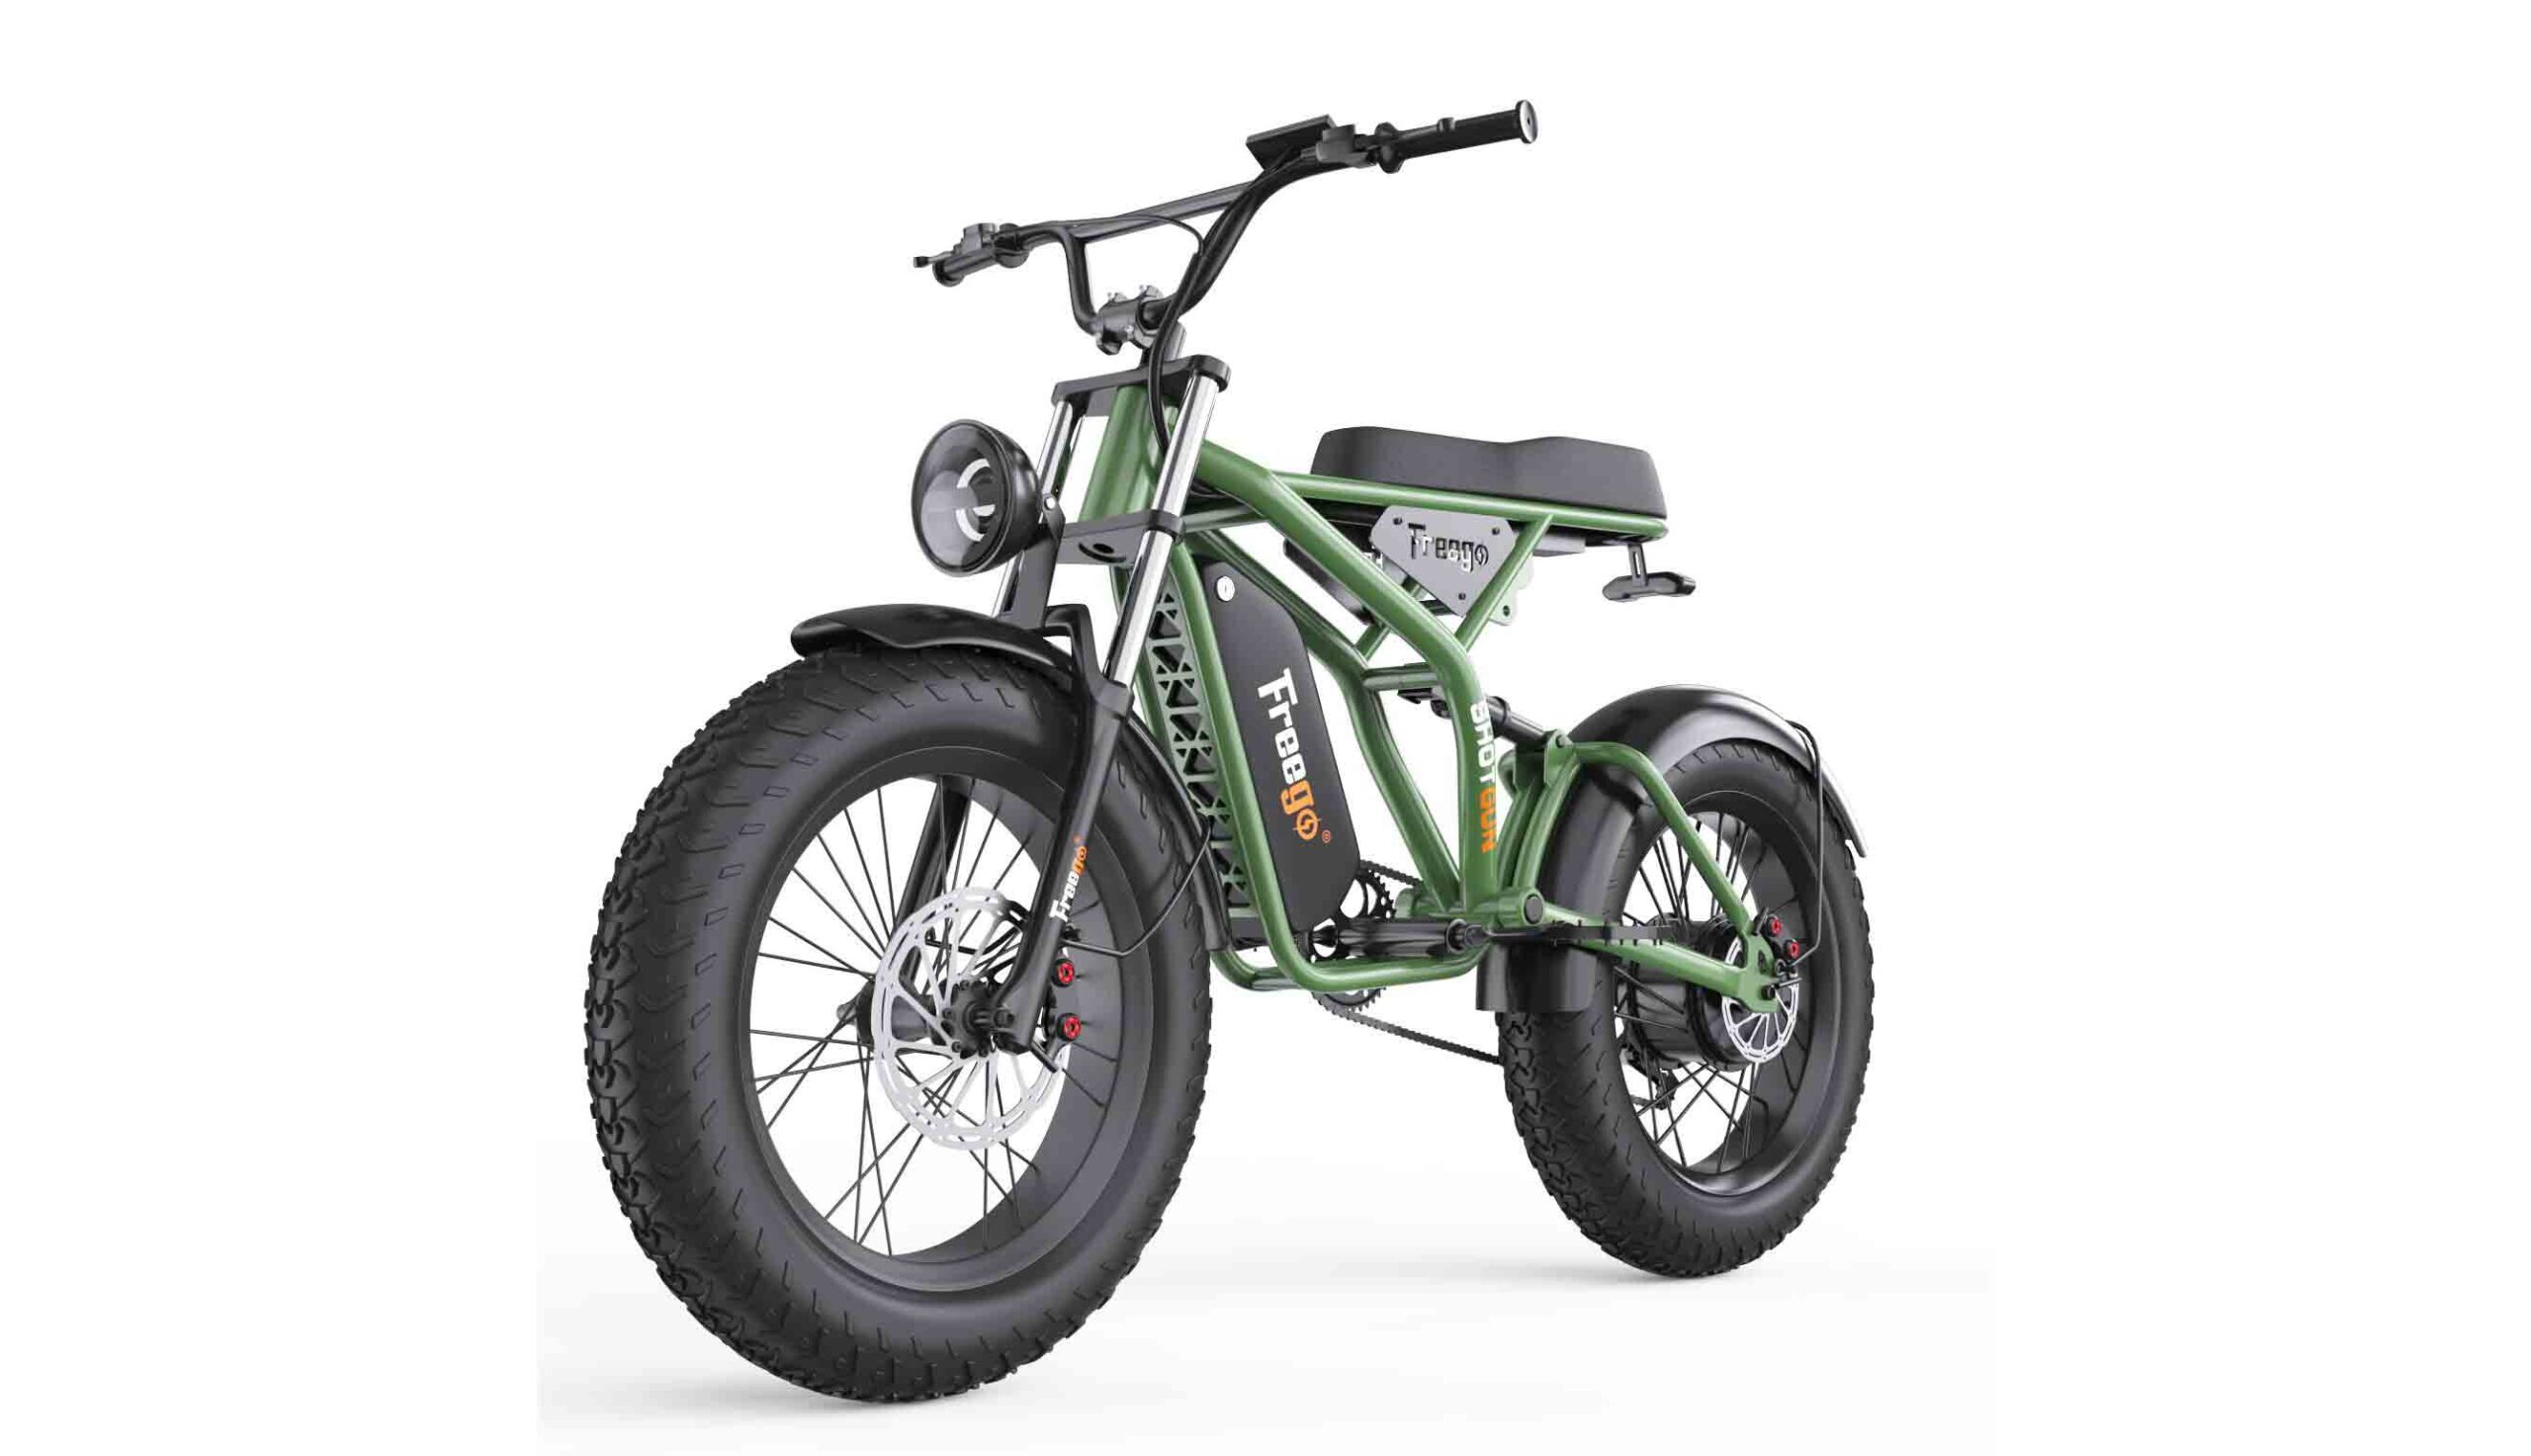 500W, 750W and 1000W Electric Bikes: Which is Better?